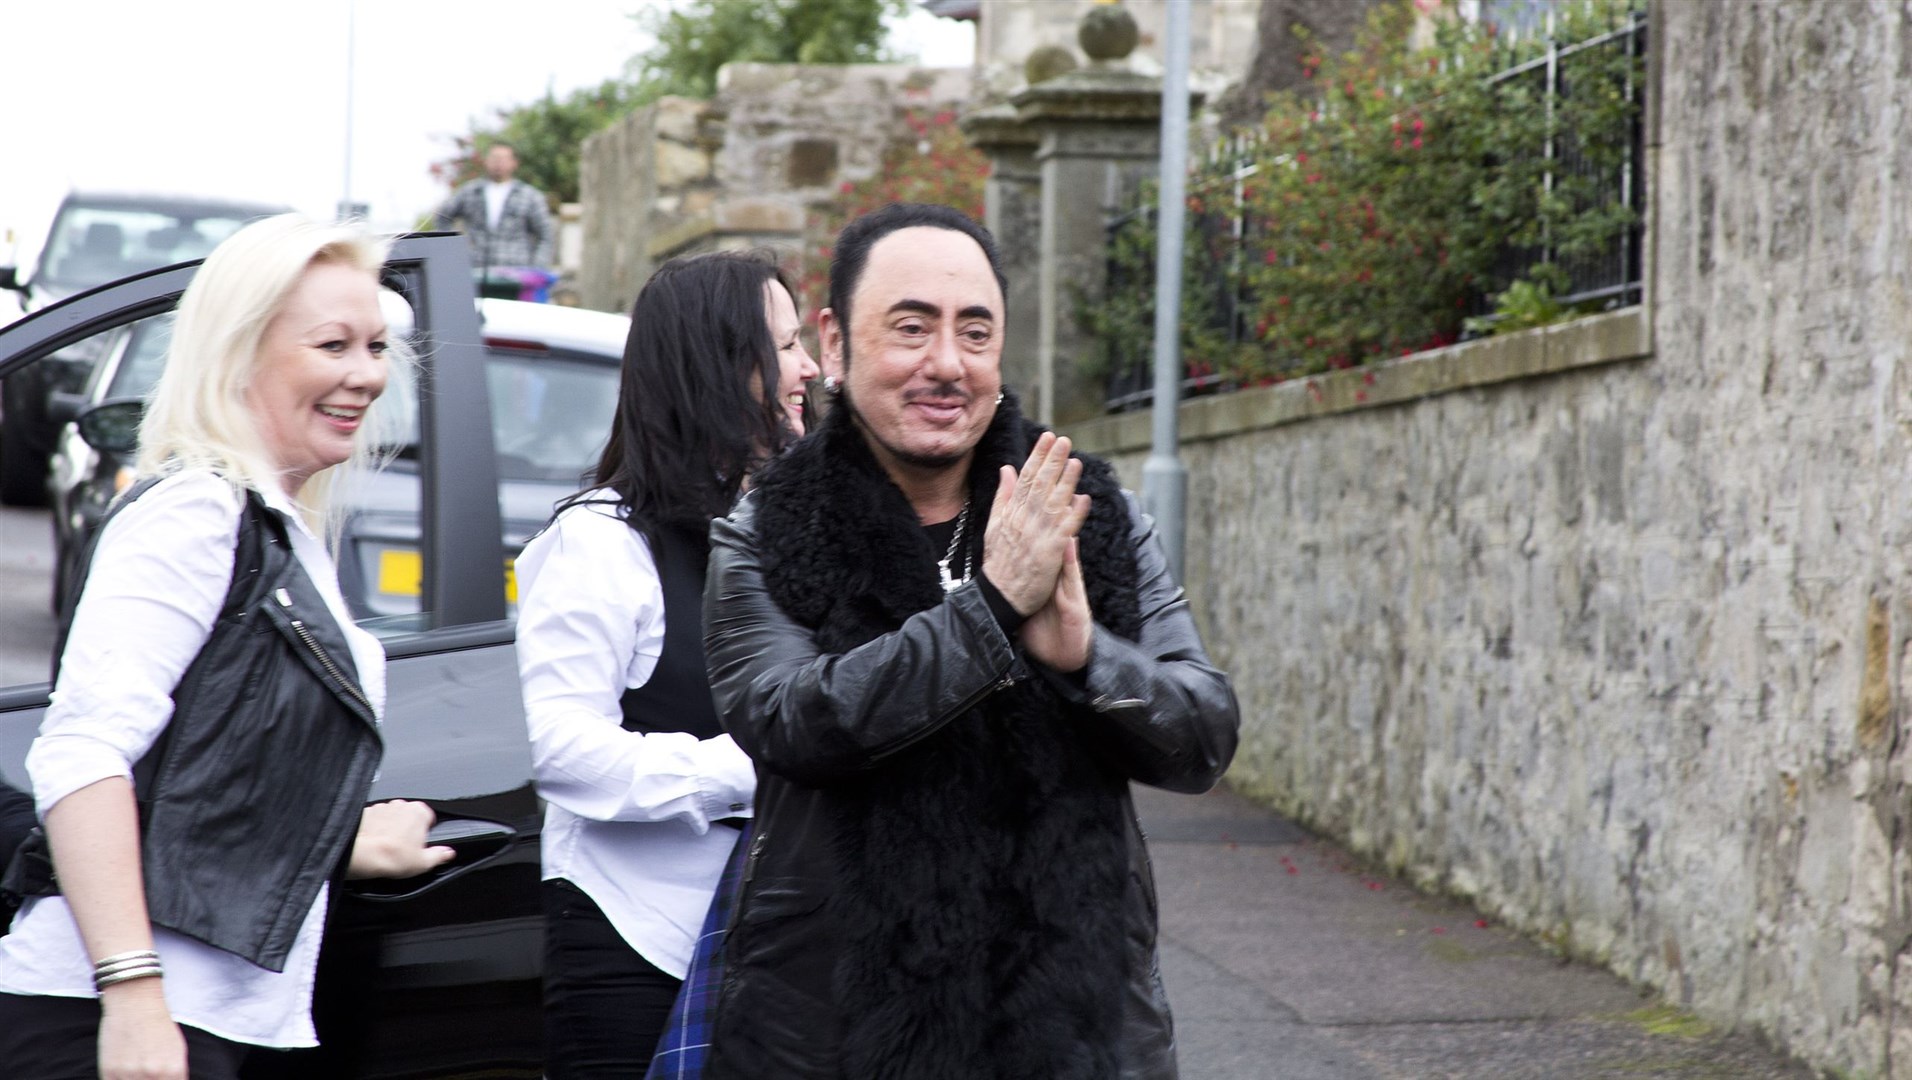 David Gest visiting the Lossiemouth Entertainment Academy.